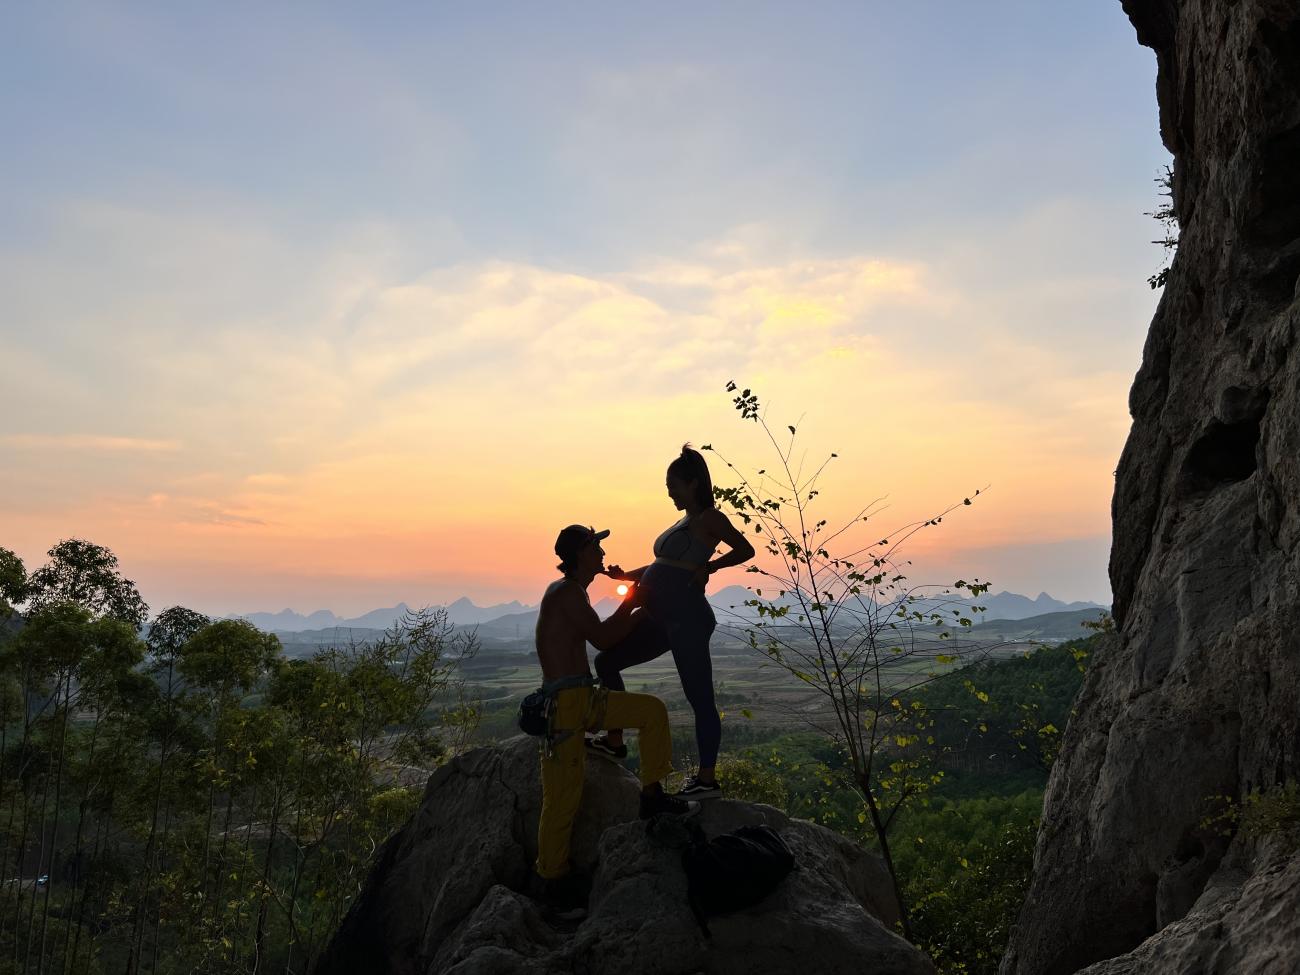 Min and her husband pose for a maternity shoot in a climbing area in Yangshuo, China during sunset, 2022.